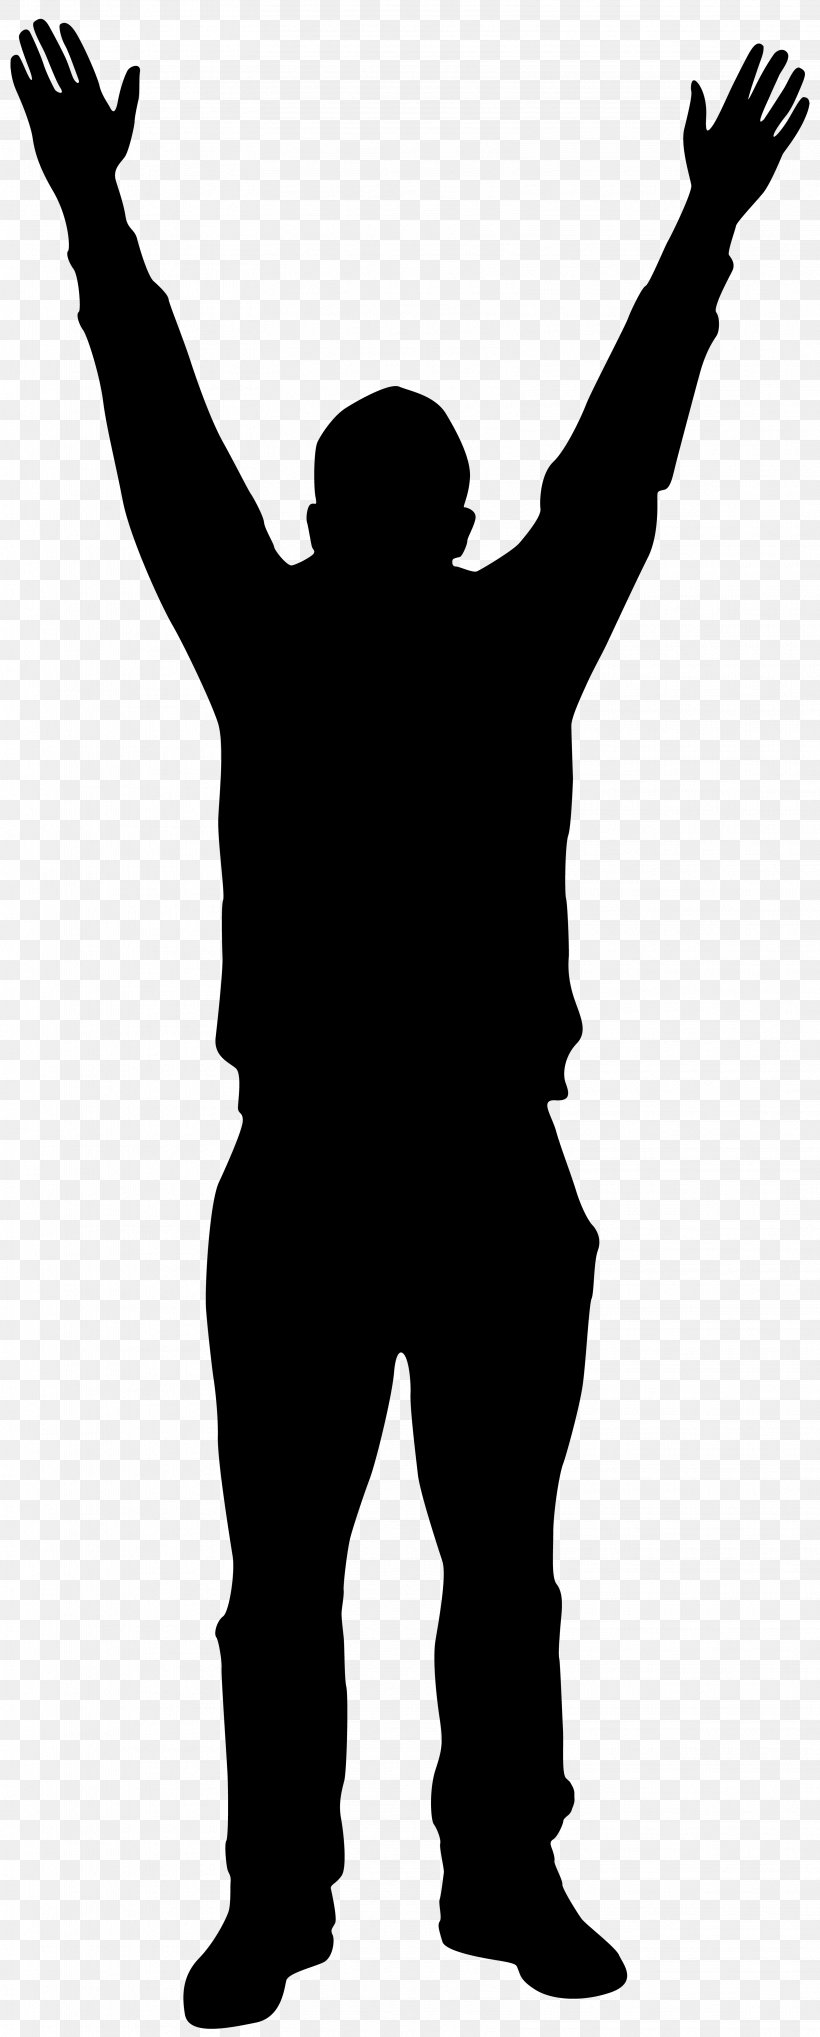 Silhouette Hand Clip Art, PNG, 3219x8000px, Silhouette, Black And White, Free Content, Hand, Holding Hands Download Free